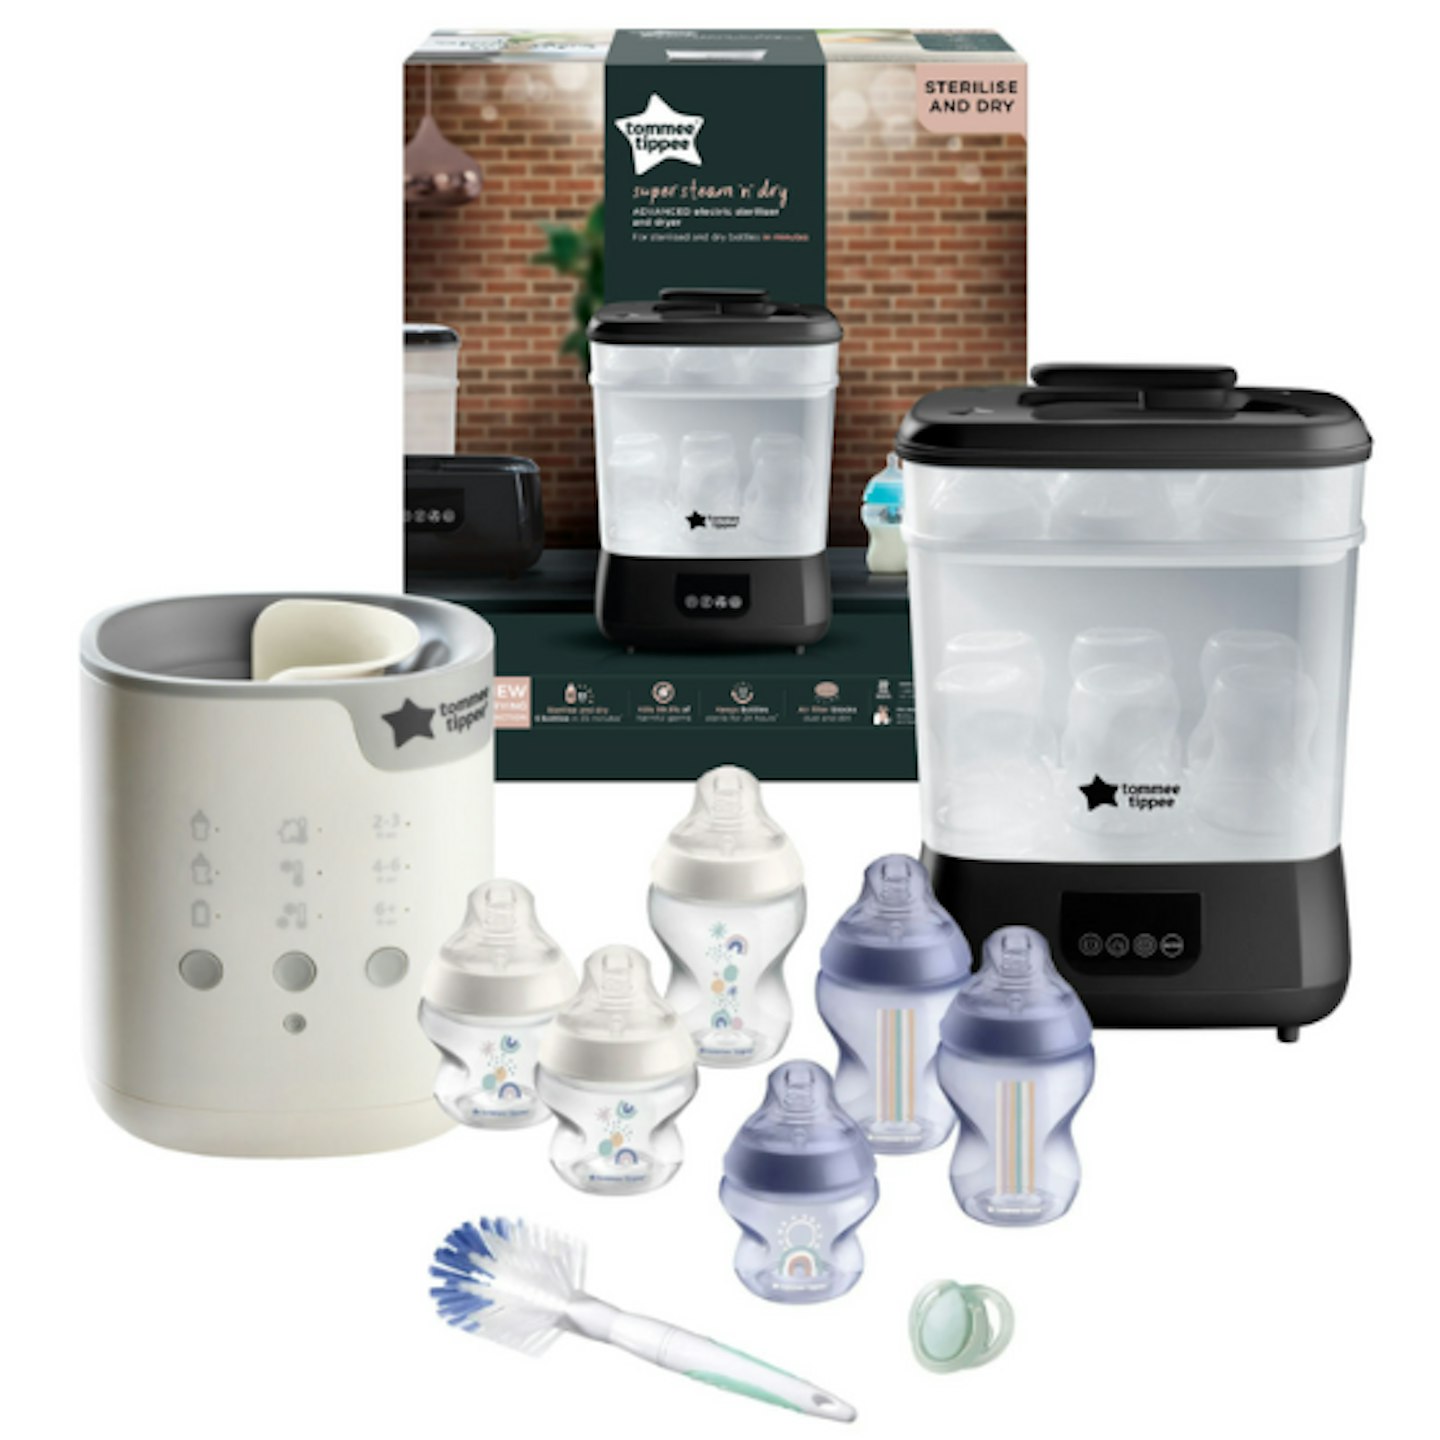 Black Friday baby bundles Tommy tippee